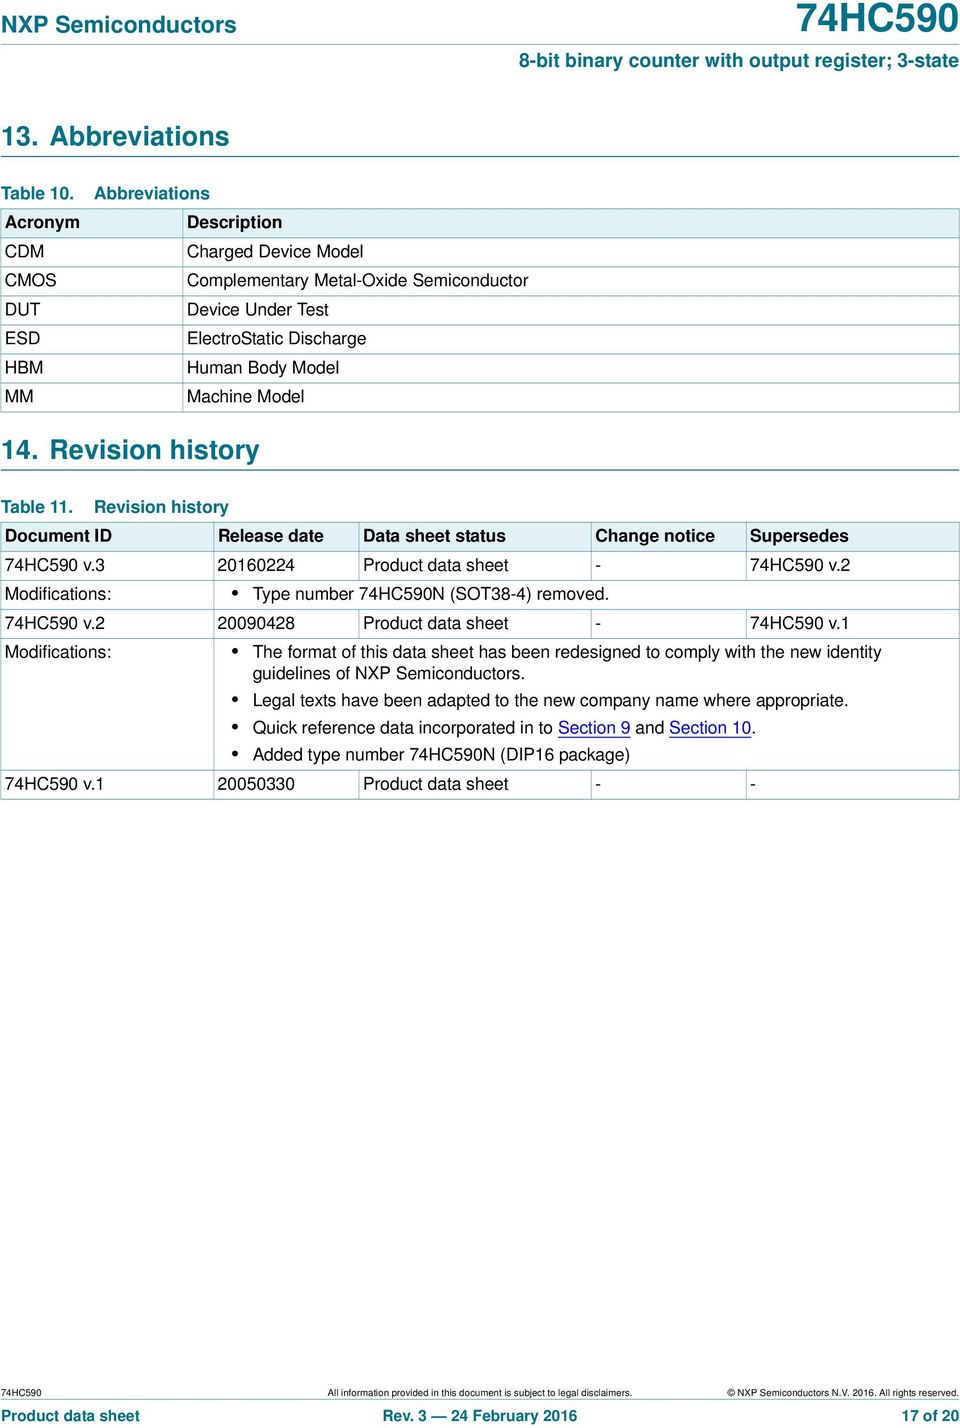 Revision history Table 11. Revision history Document ID Release date Data sheet status Change notice Supersedes v.3 20160224 Product data sheet - v.2 Modifications: Type number N (SOT38-4) removed. v.2 20090428 Product data sheet - v.